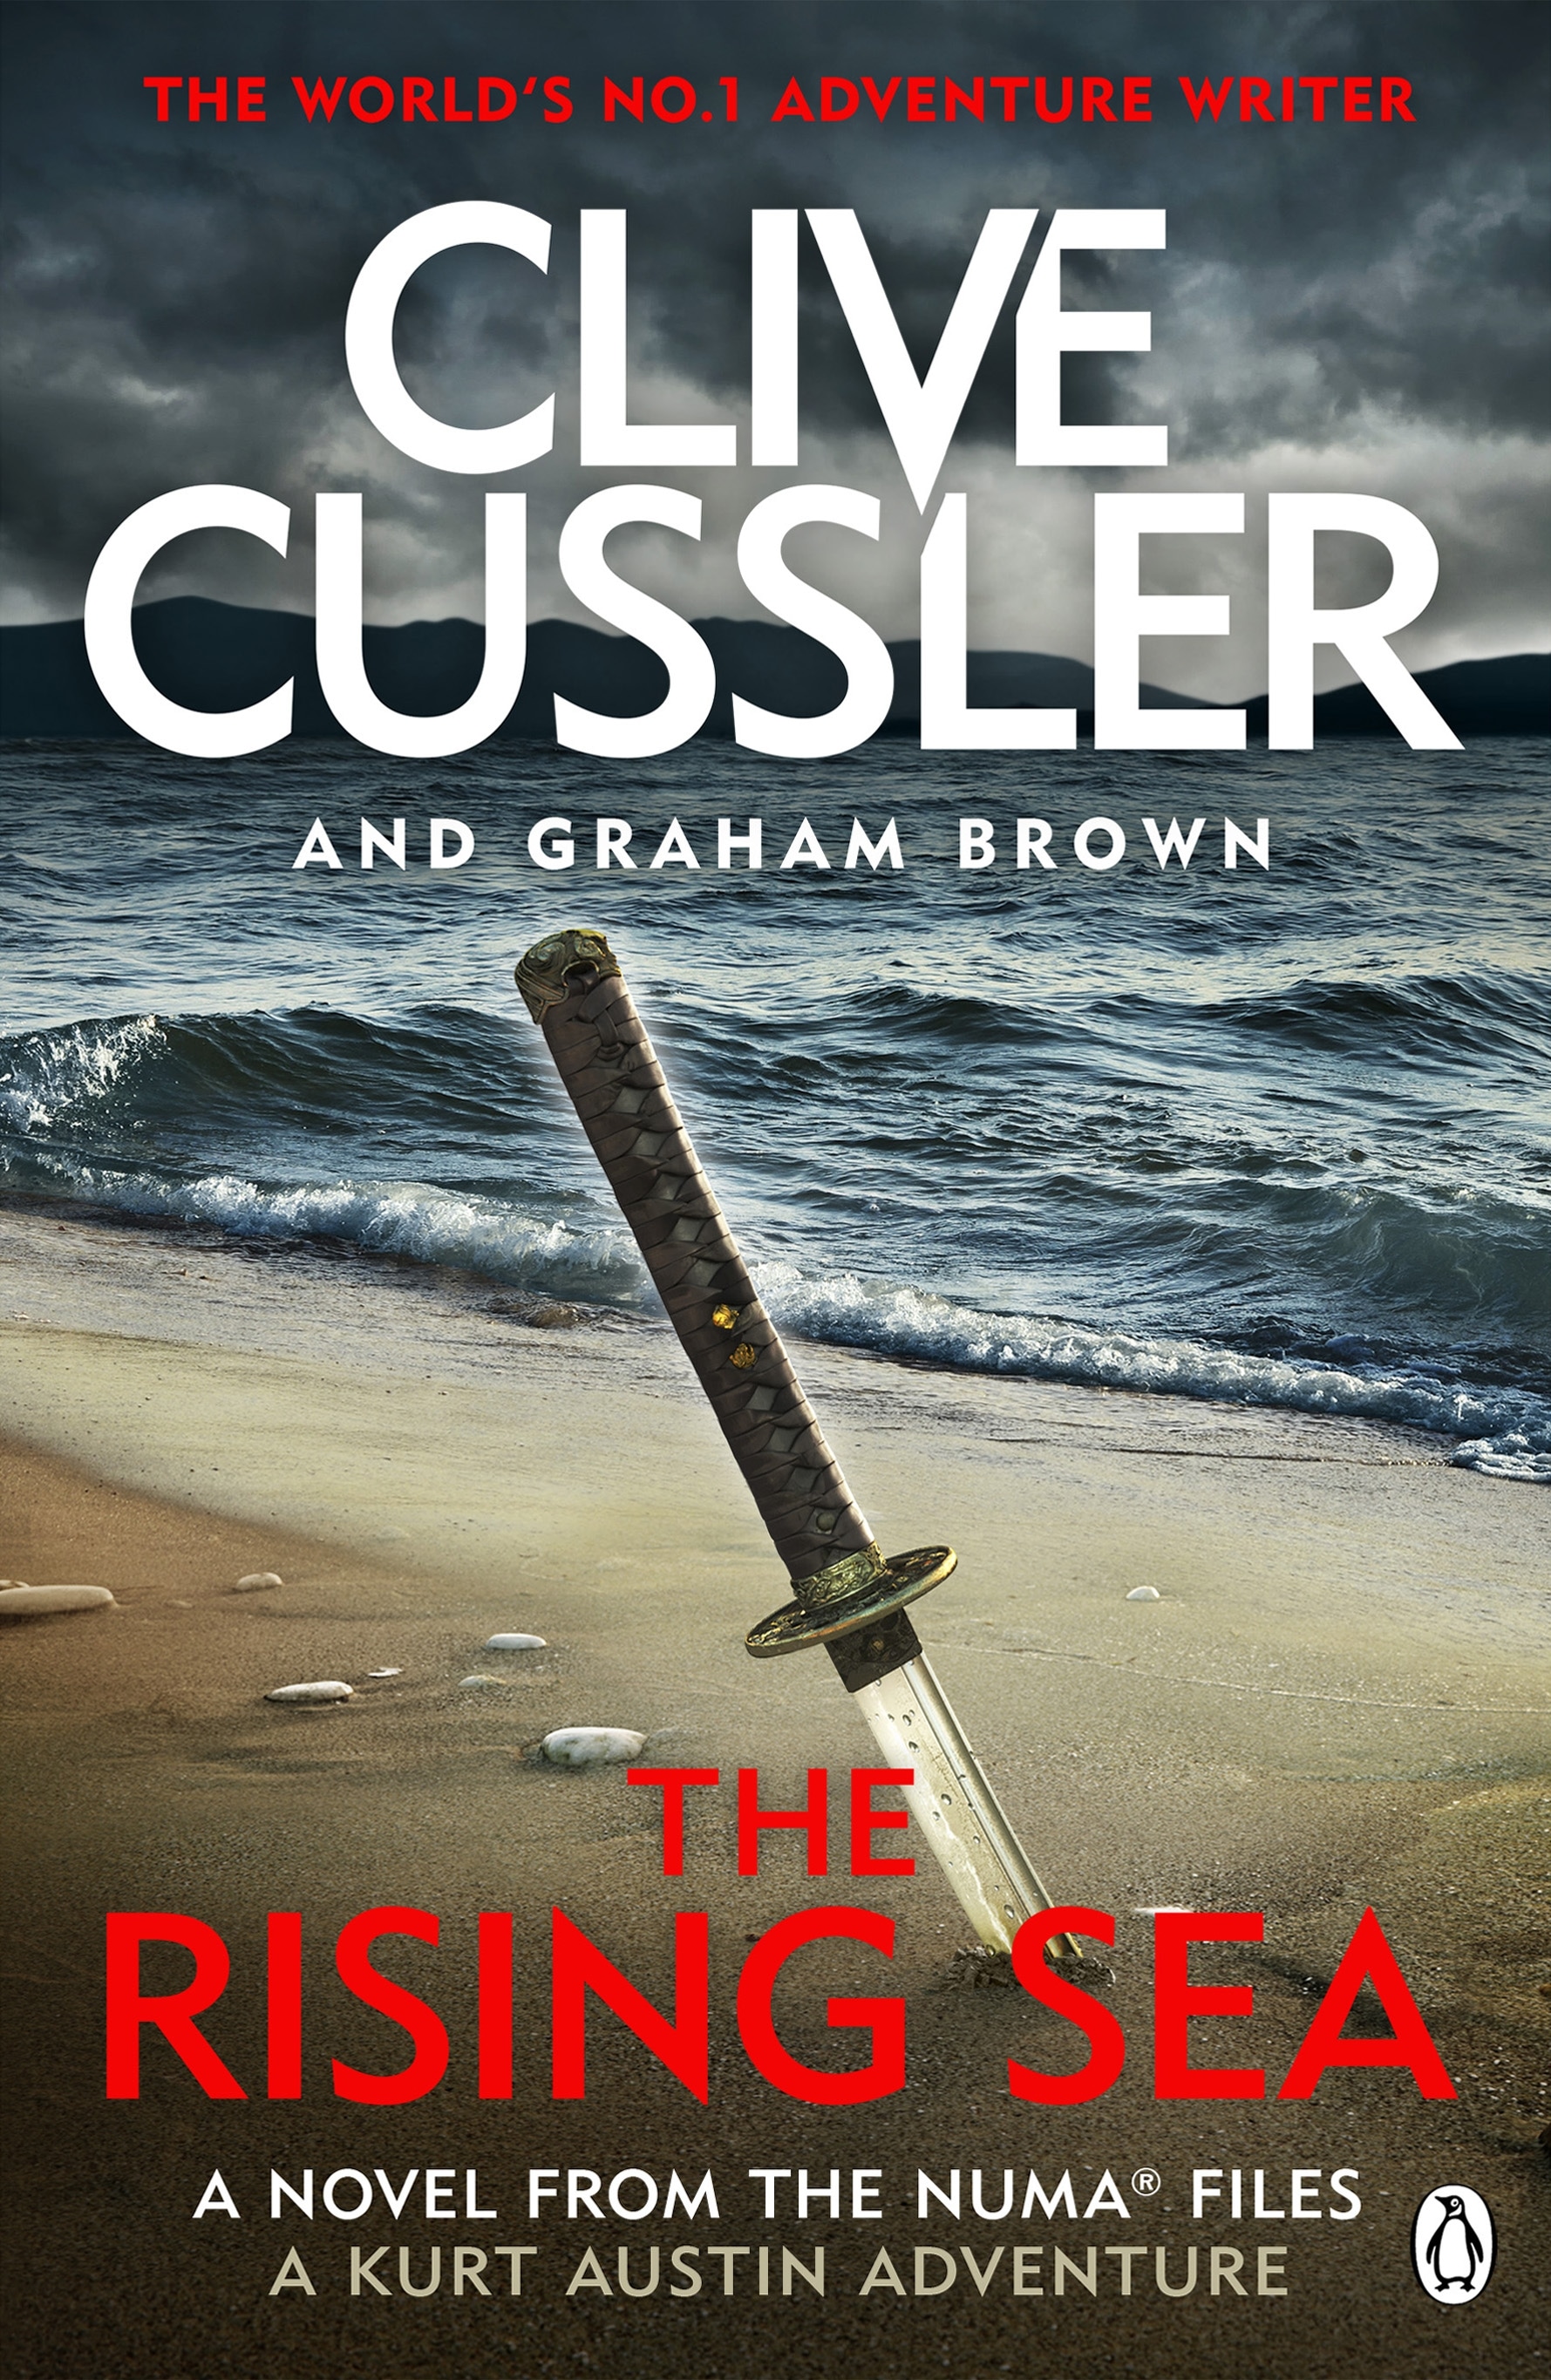 Book “The Rising Sea” by Clive Cussler, Graham Brown — March 21, 2019